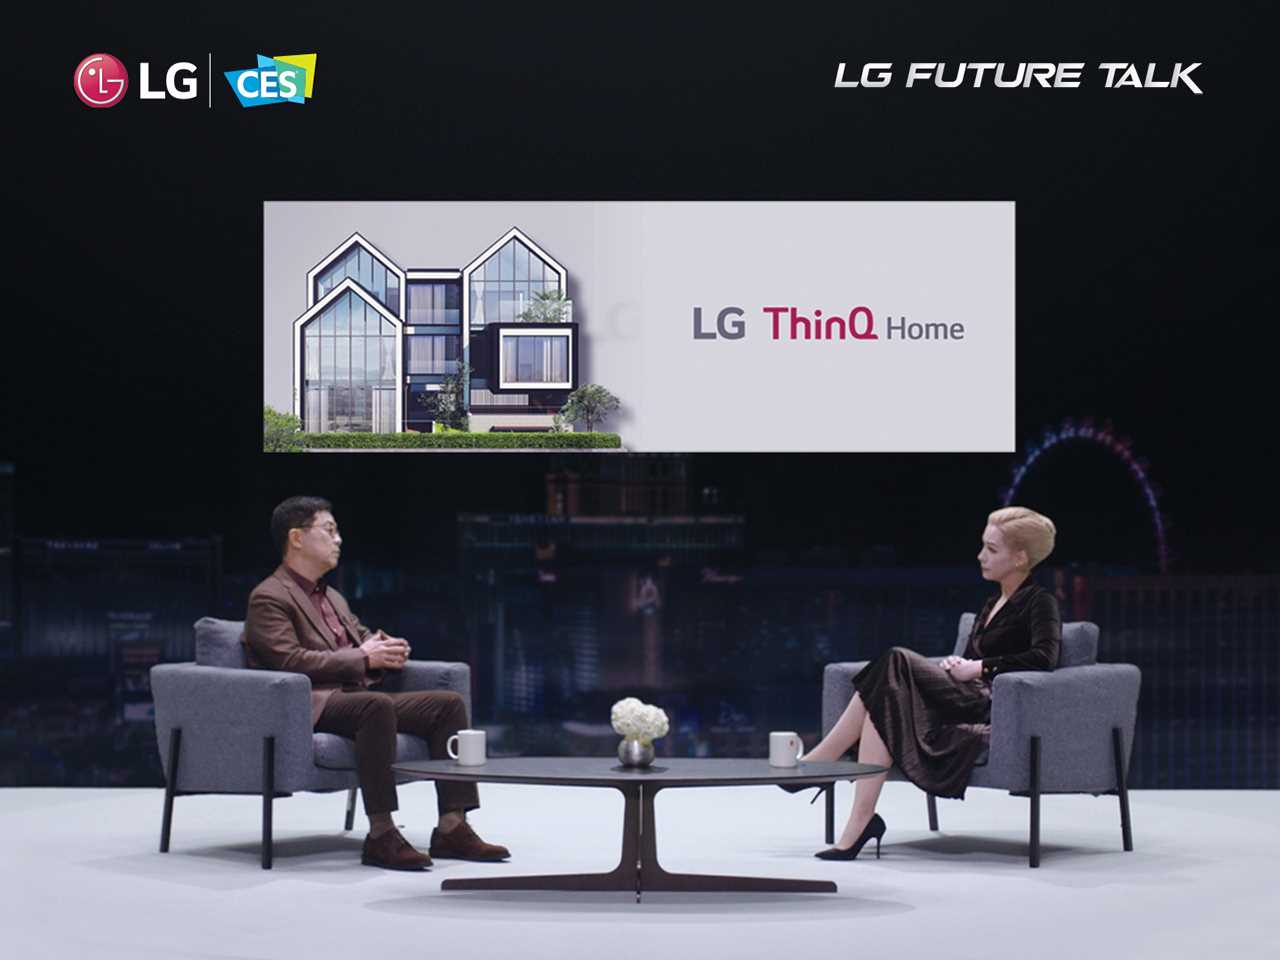 lg-held-virtual-discussion-talking-about-future-with-technology-leaders-2.jpg